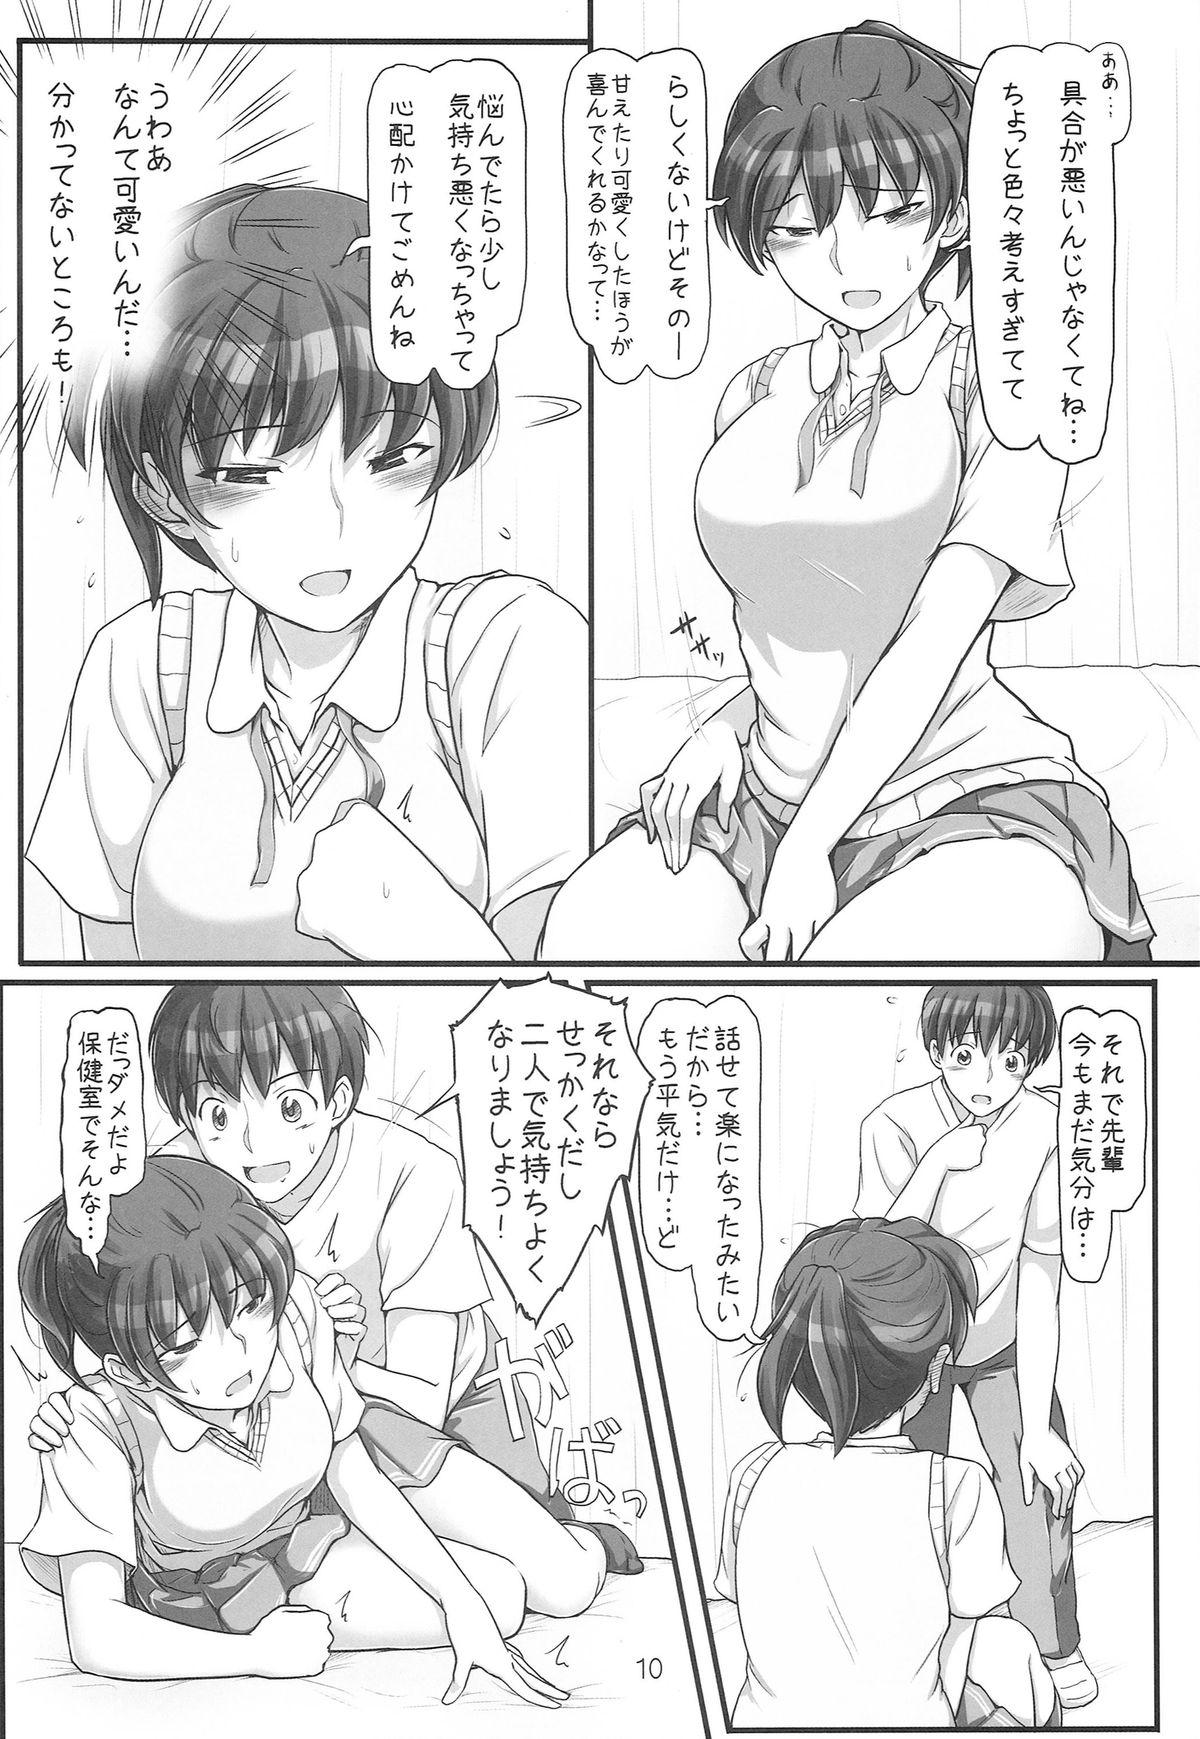 Shaven sweet training - Amagami Watersports - Page 10